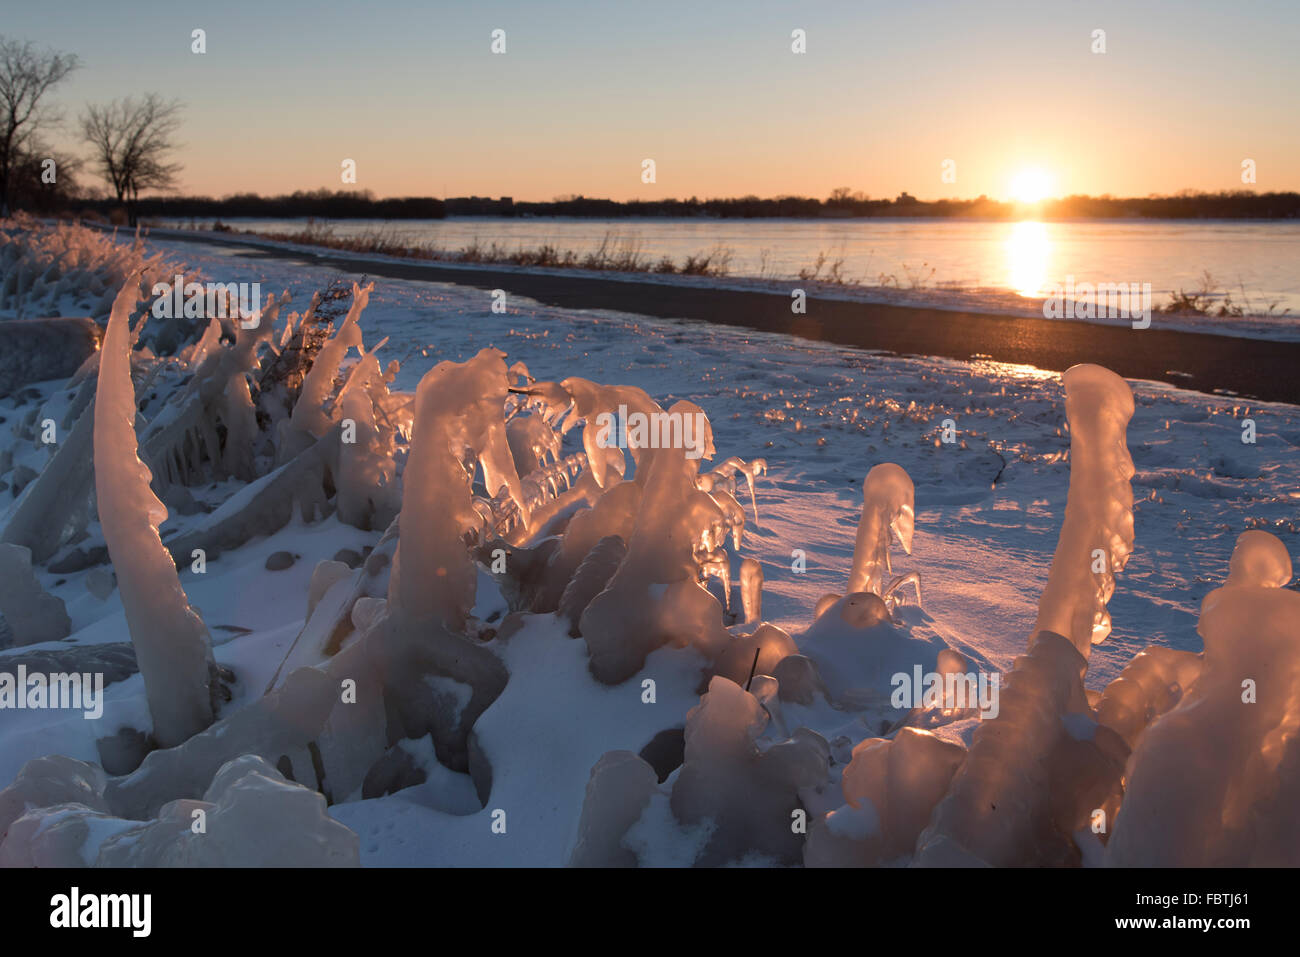 Rows of plants covered in ice from the spray of water off the lake.  The ice begins to glow from the last light at the end of th Stock Photo